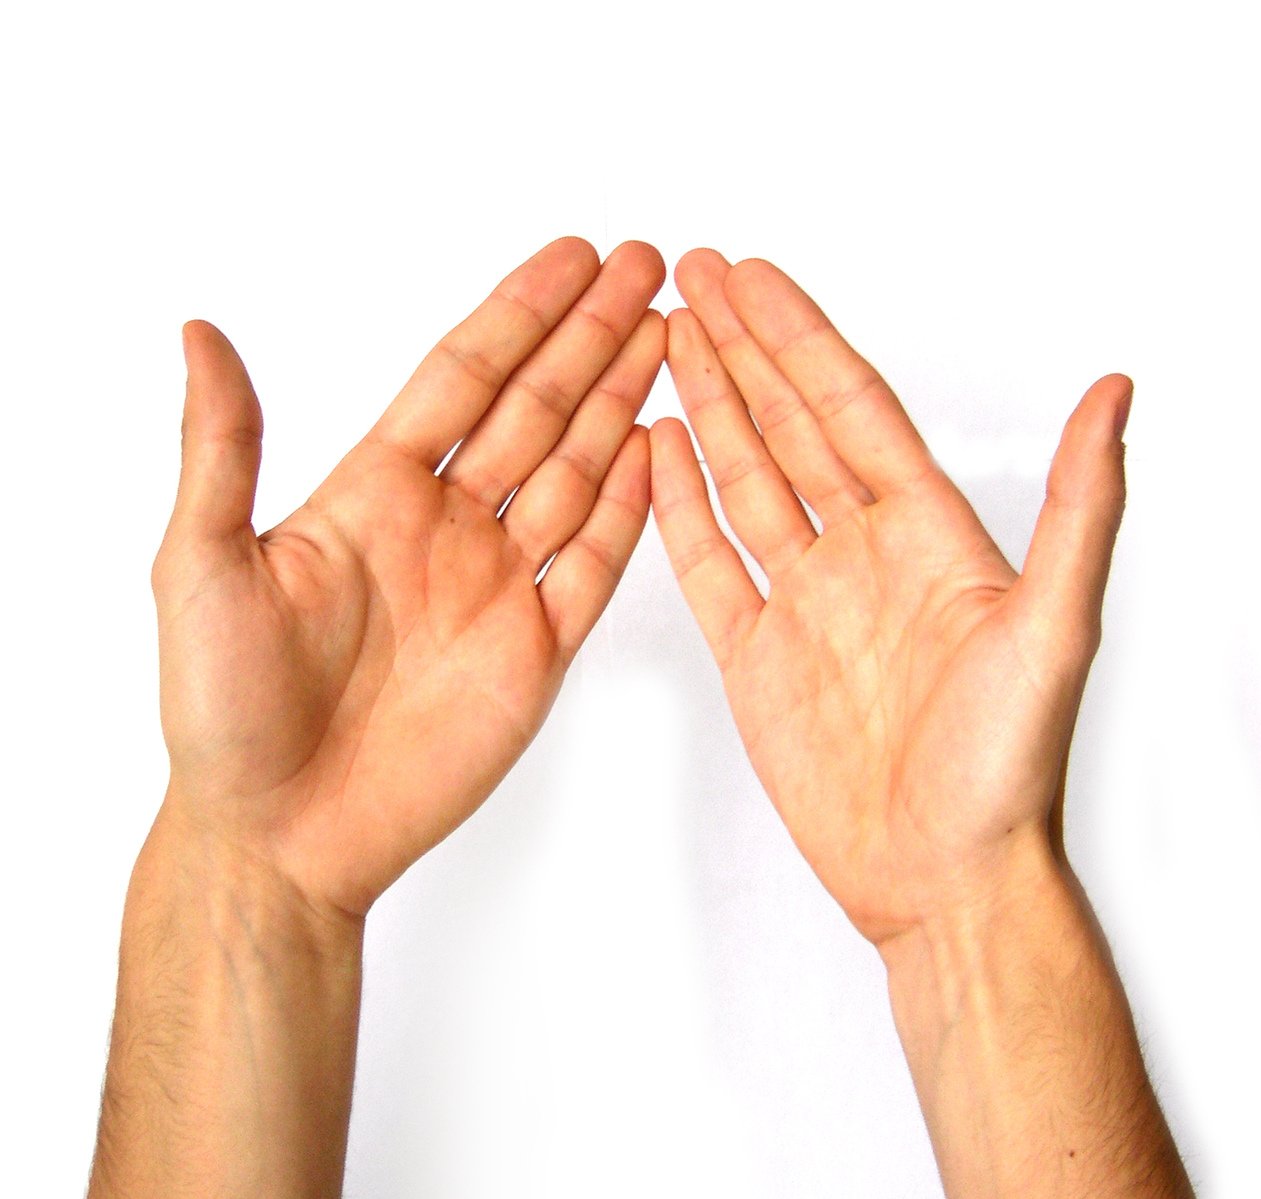 hands reaching up to reach for soing on the table